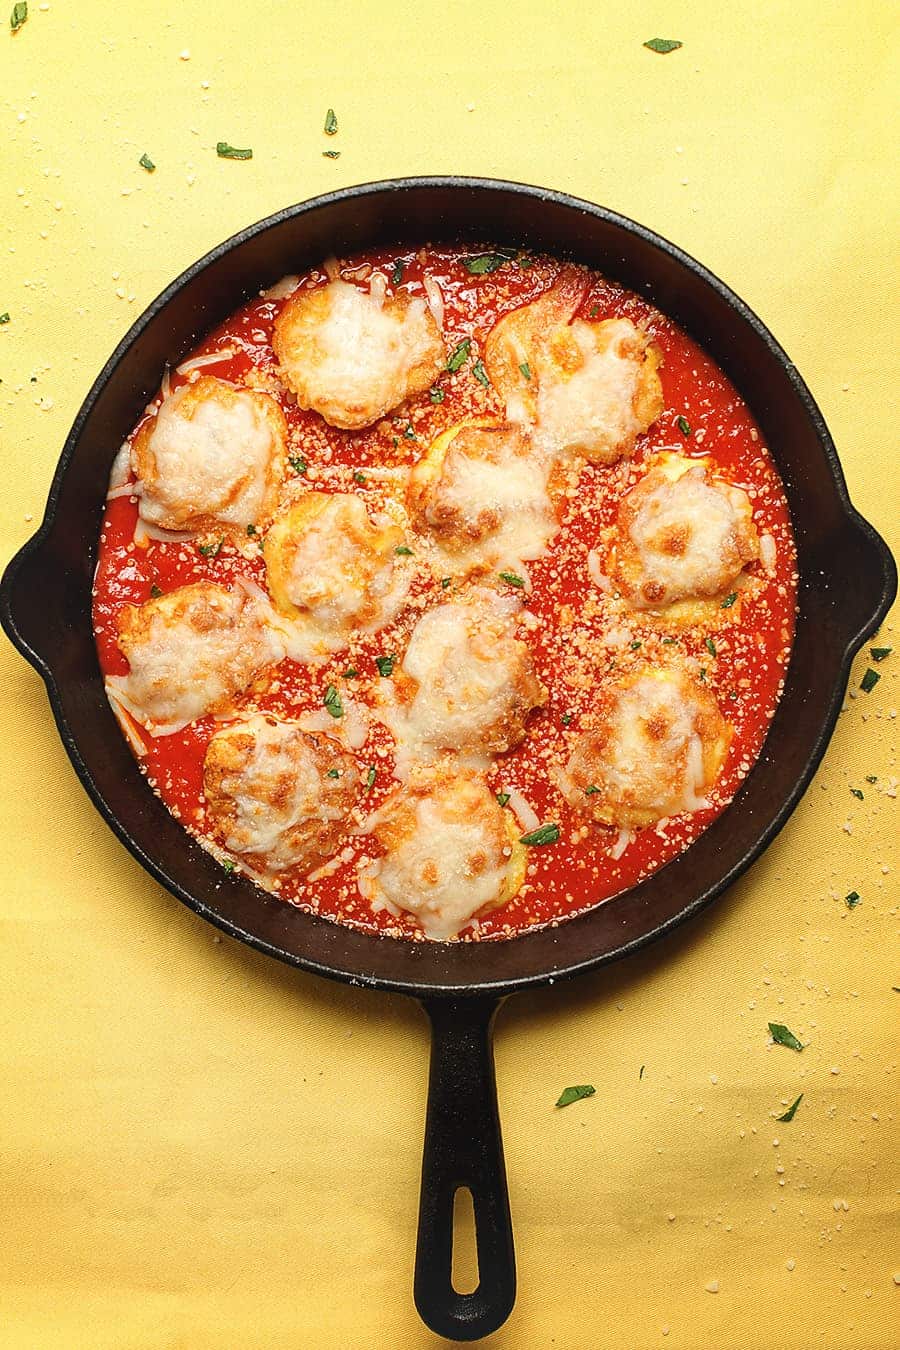 shrimp parmesan in a cast iron skillet on a yellow table cloth